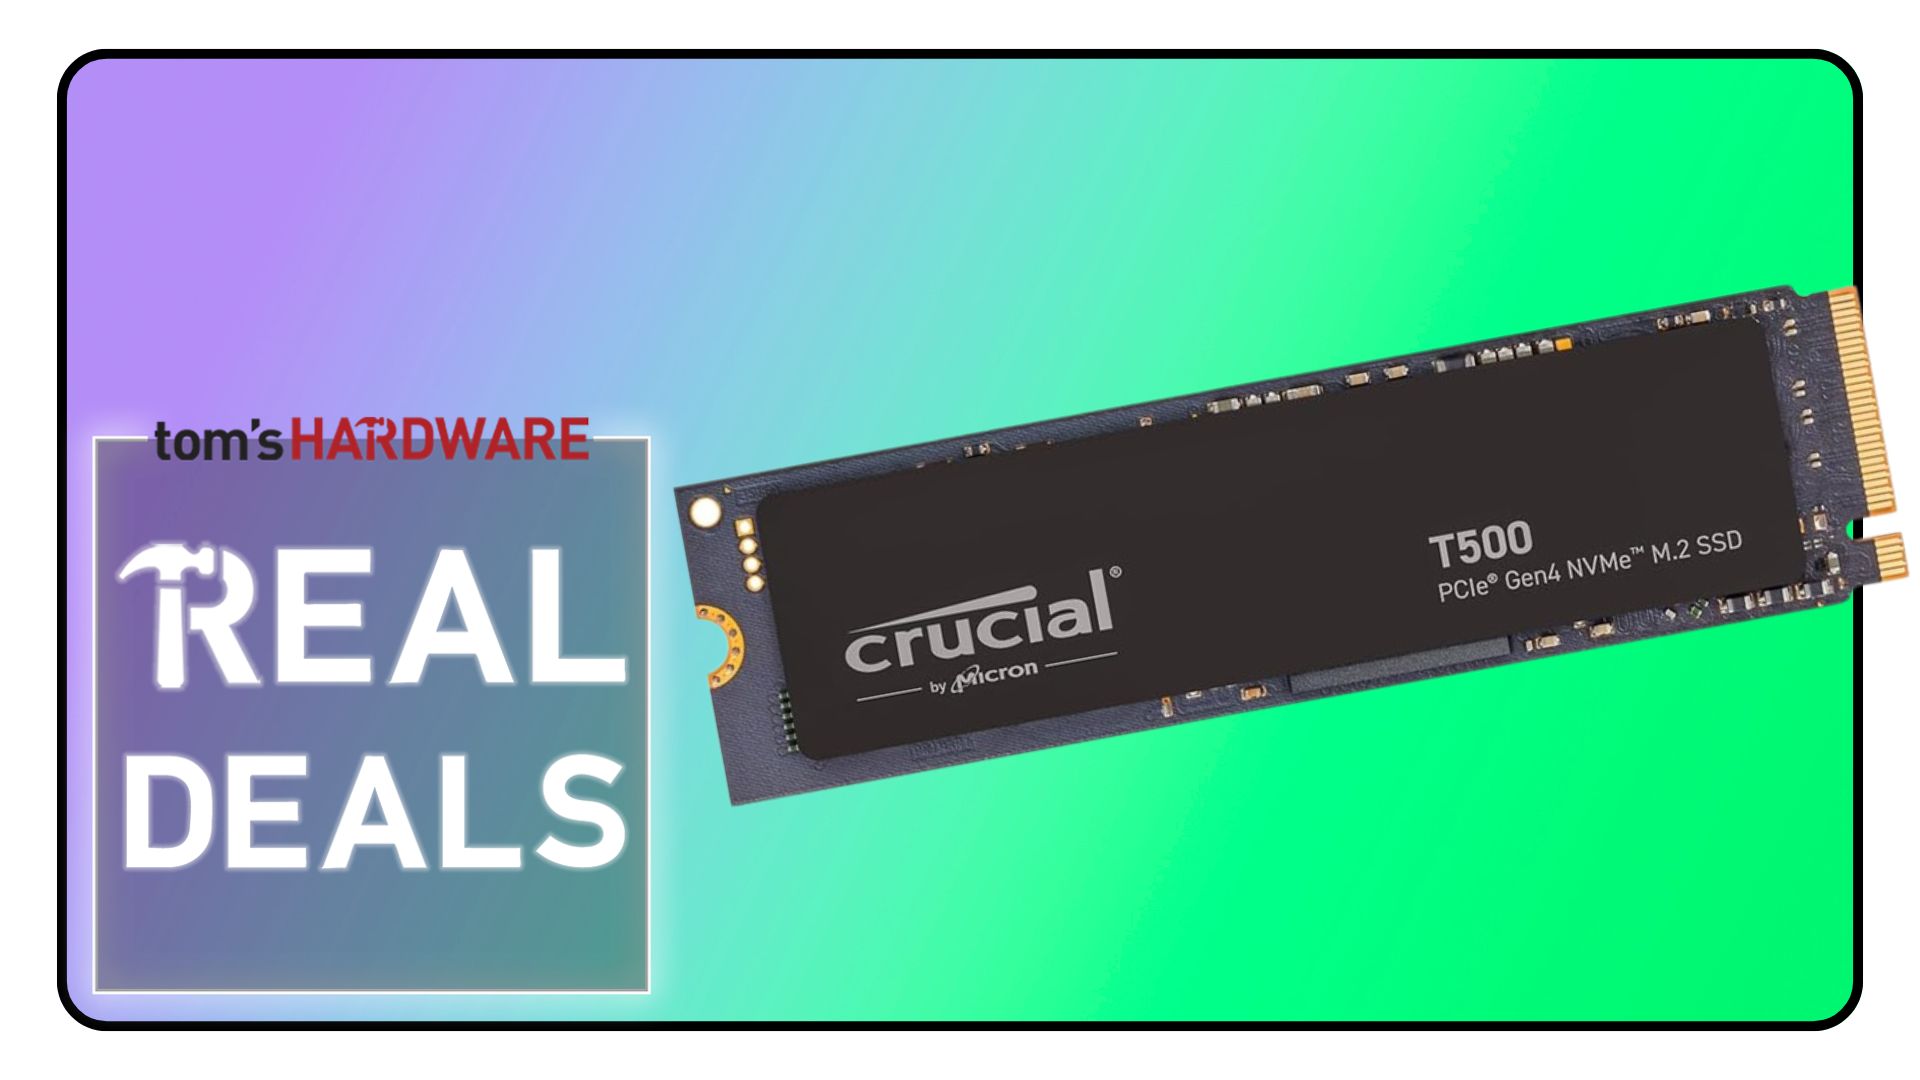 Crucial's speedy T500 2TB SSD is back down to $138 thanks to Memorial Day discounts